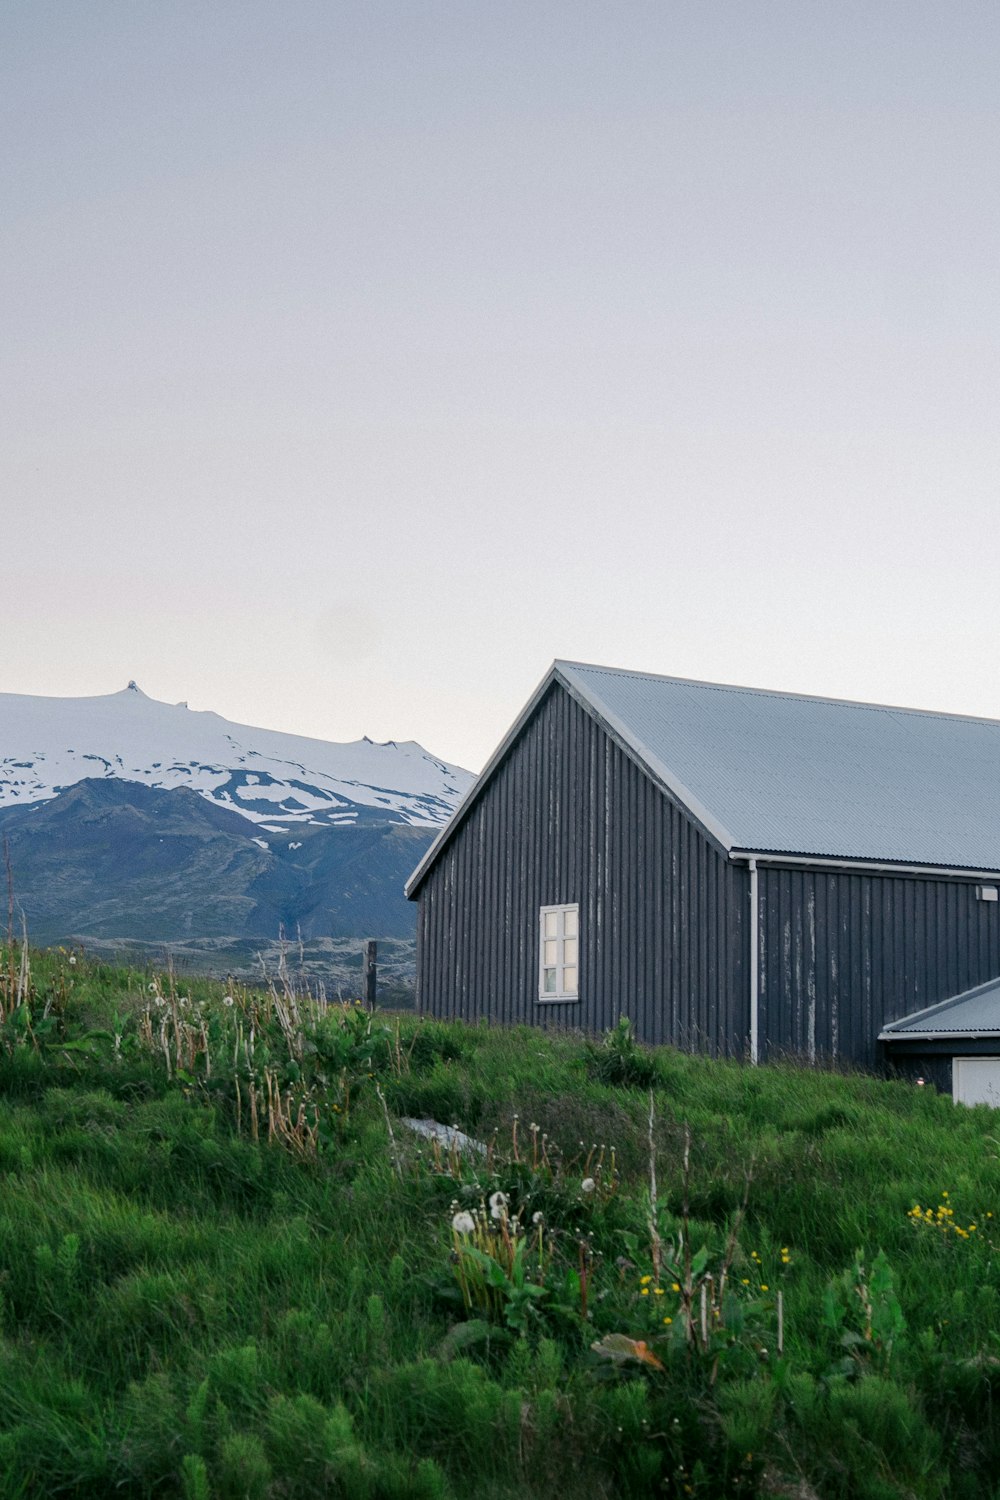 a barn in a field with a mountain in the background